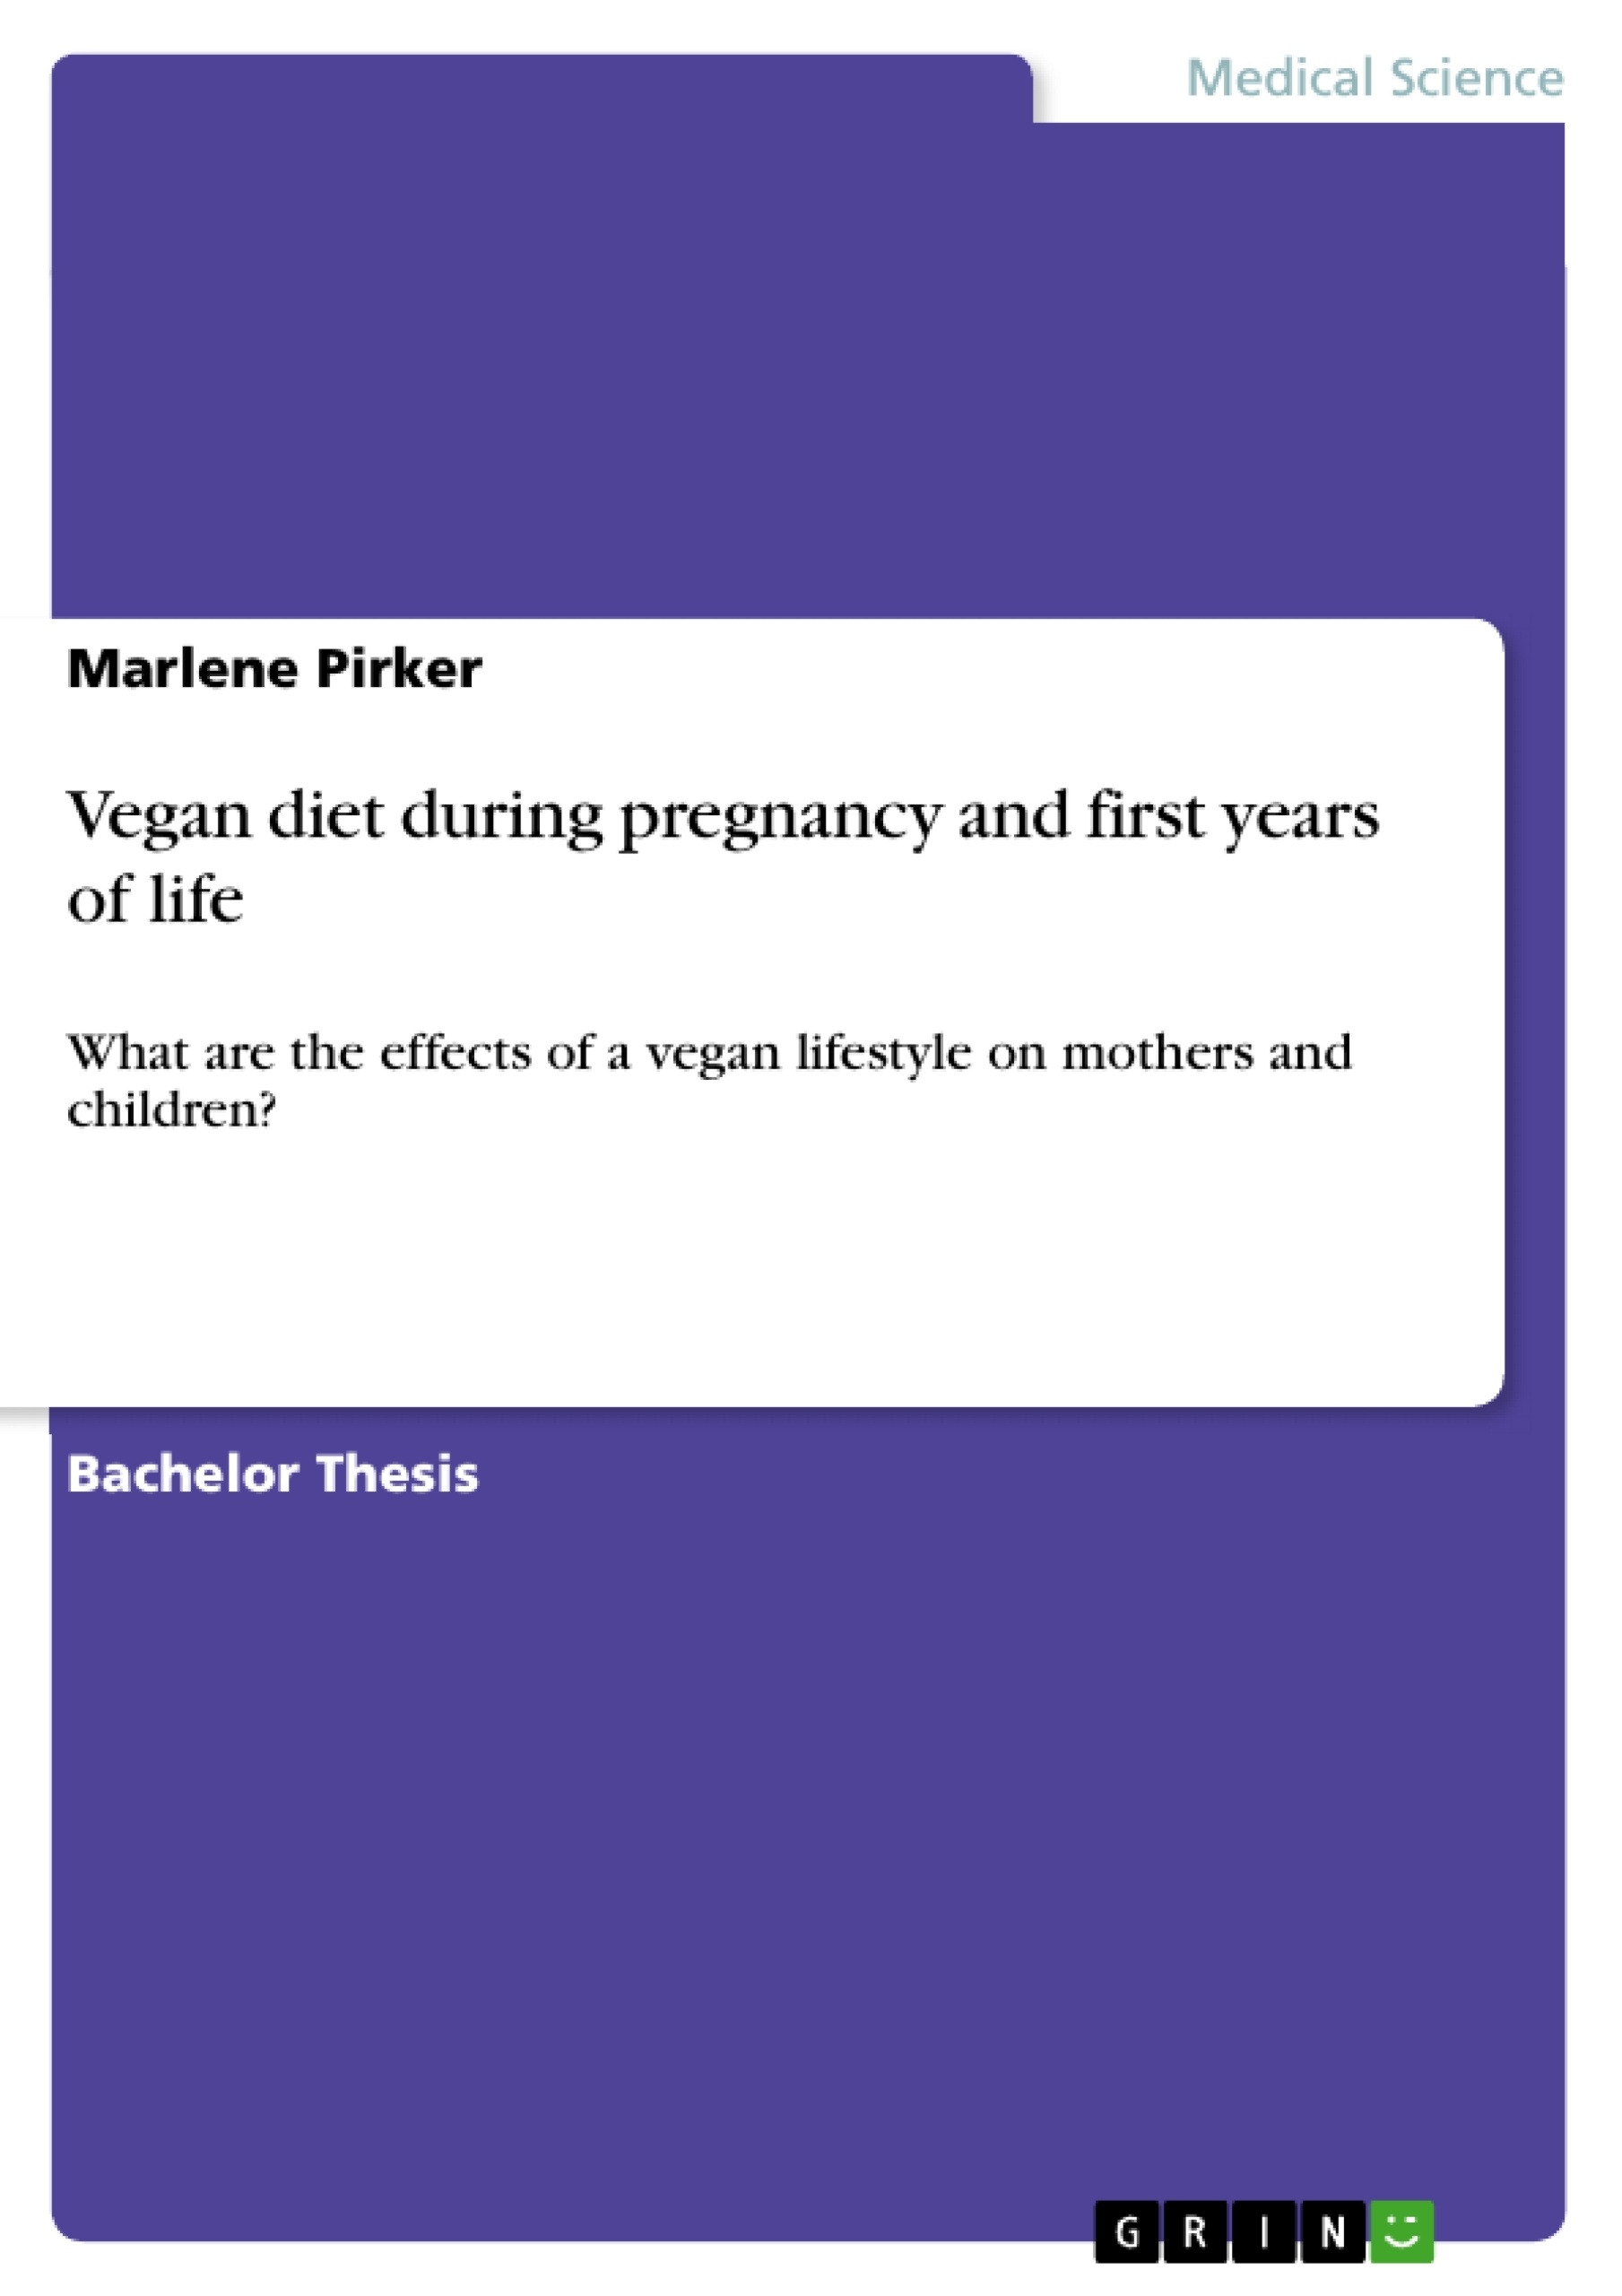 Title: Vegan diet during pregnancy and first years of life